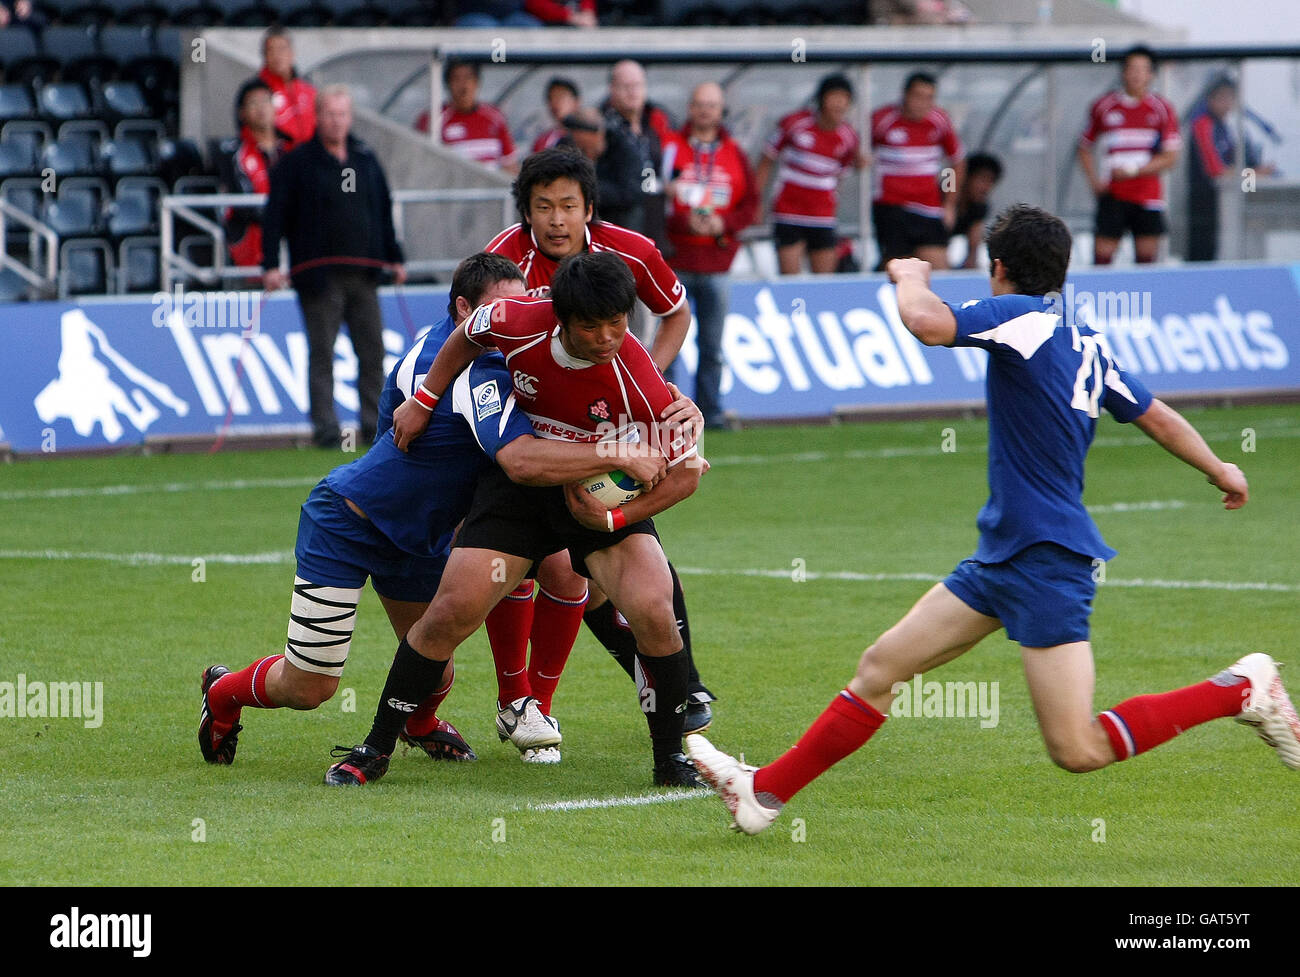 Rugby Union - Invesco Perpetual Junior Rugby World Cup - France v Japan -  Liberty Stadium Stock Photo - Alamy